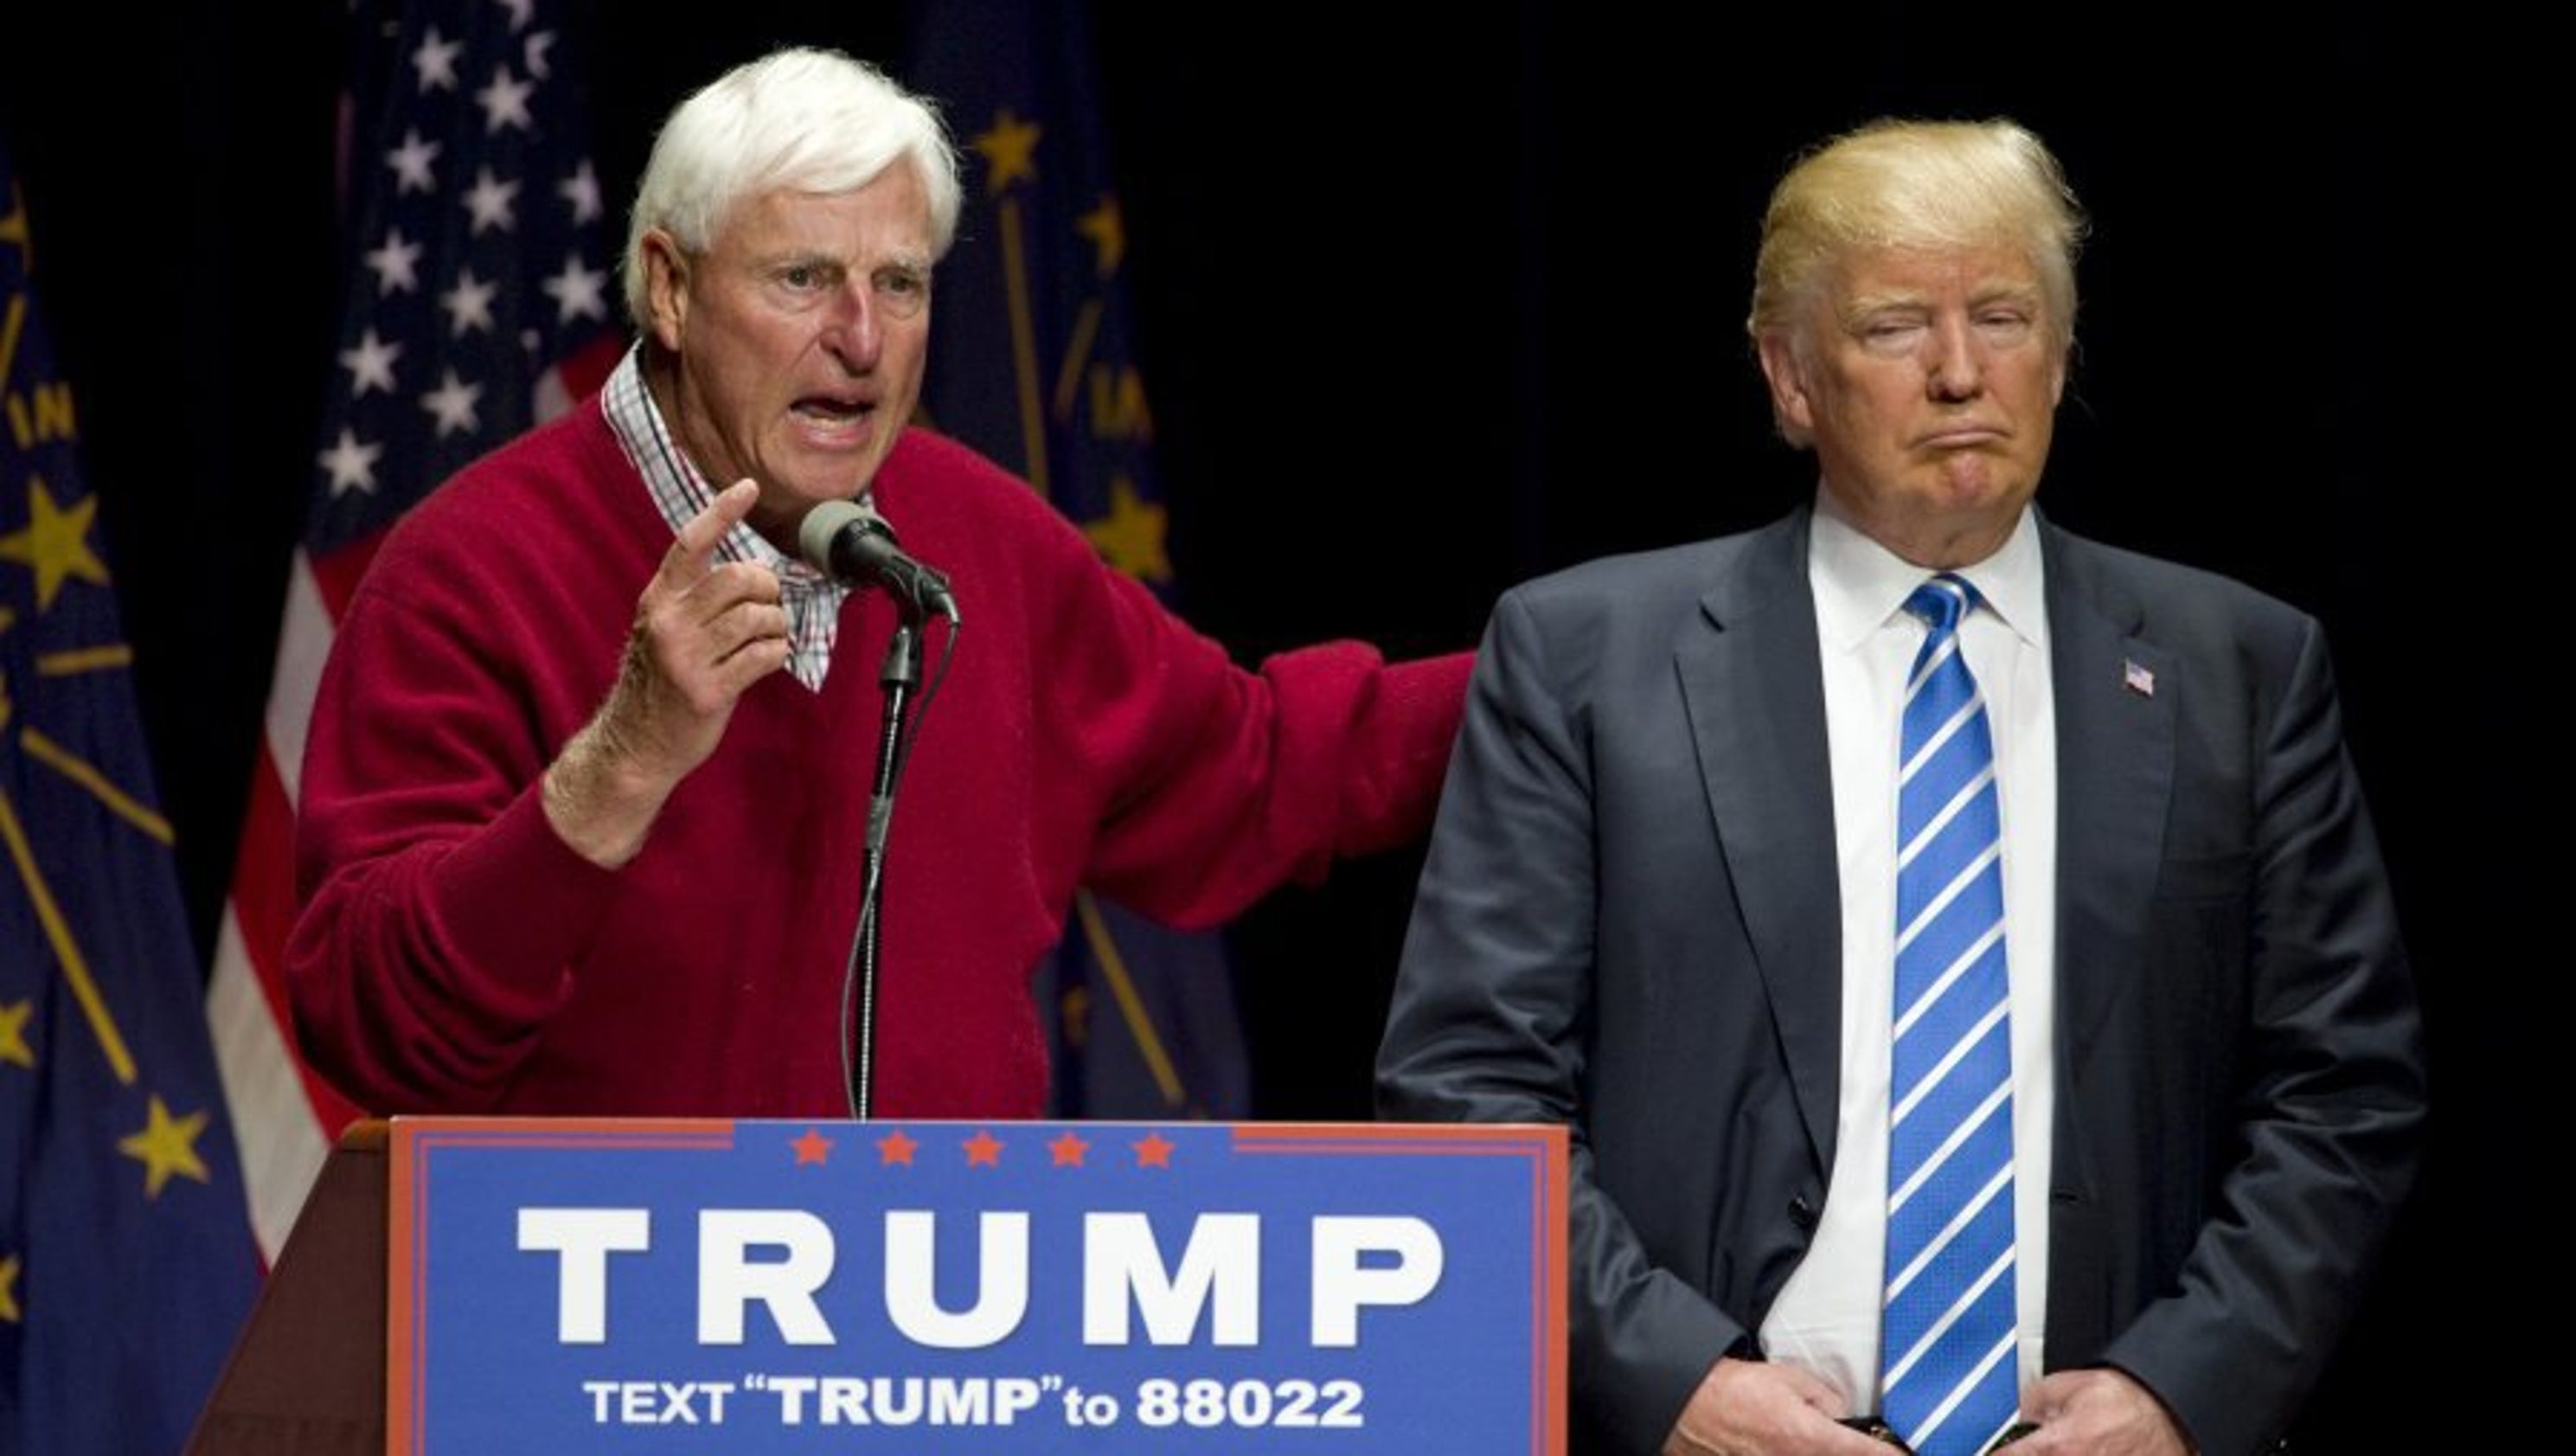 Donald Trump asks: Who did more for Indiana, Mike Pence or Bob Knight?